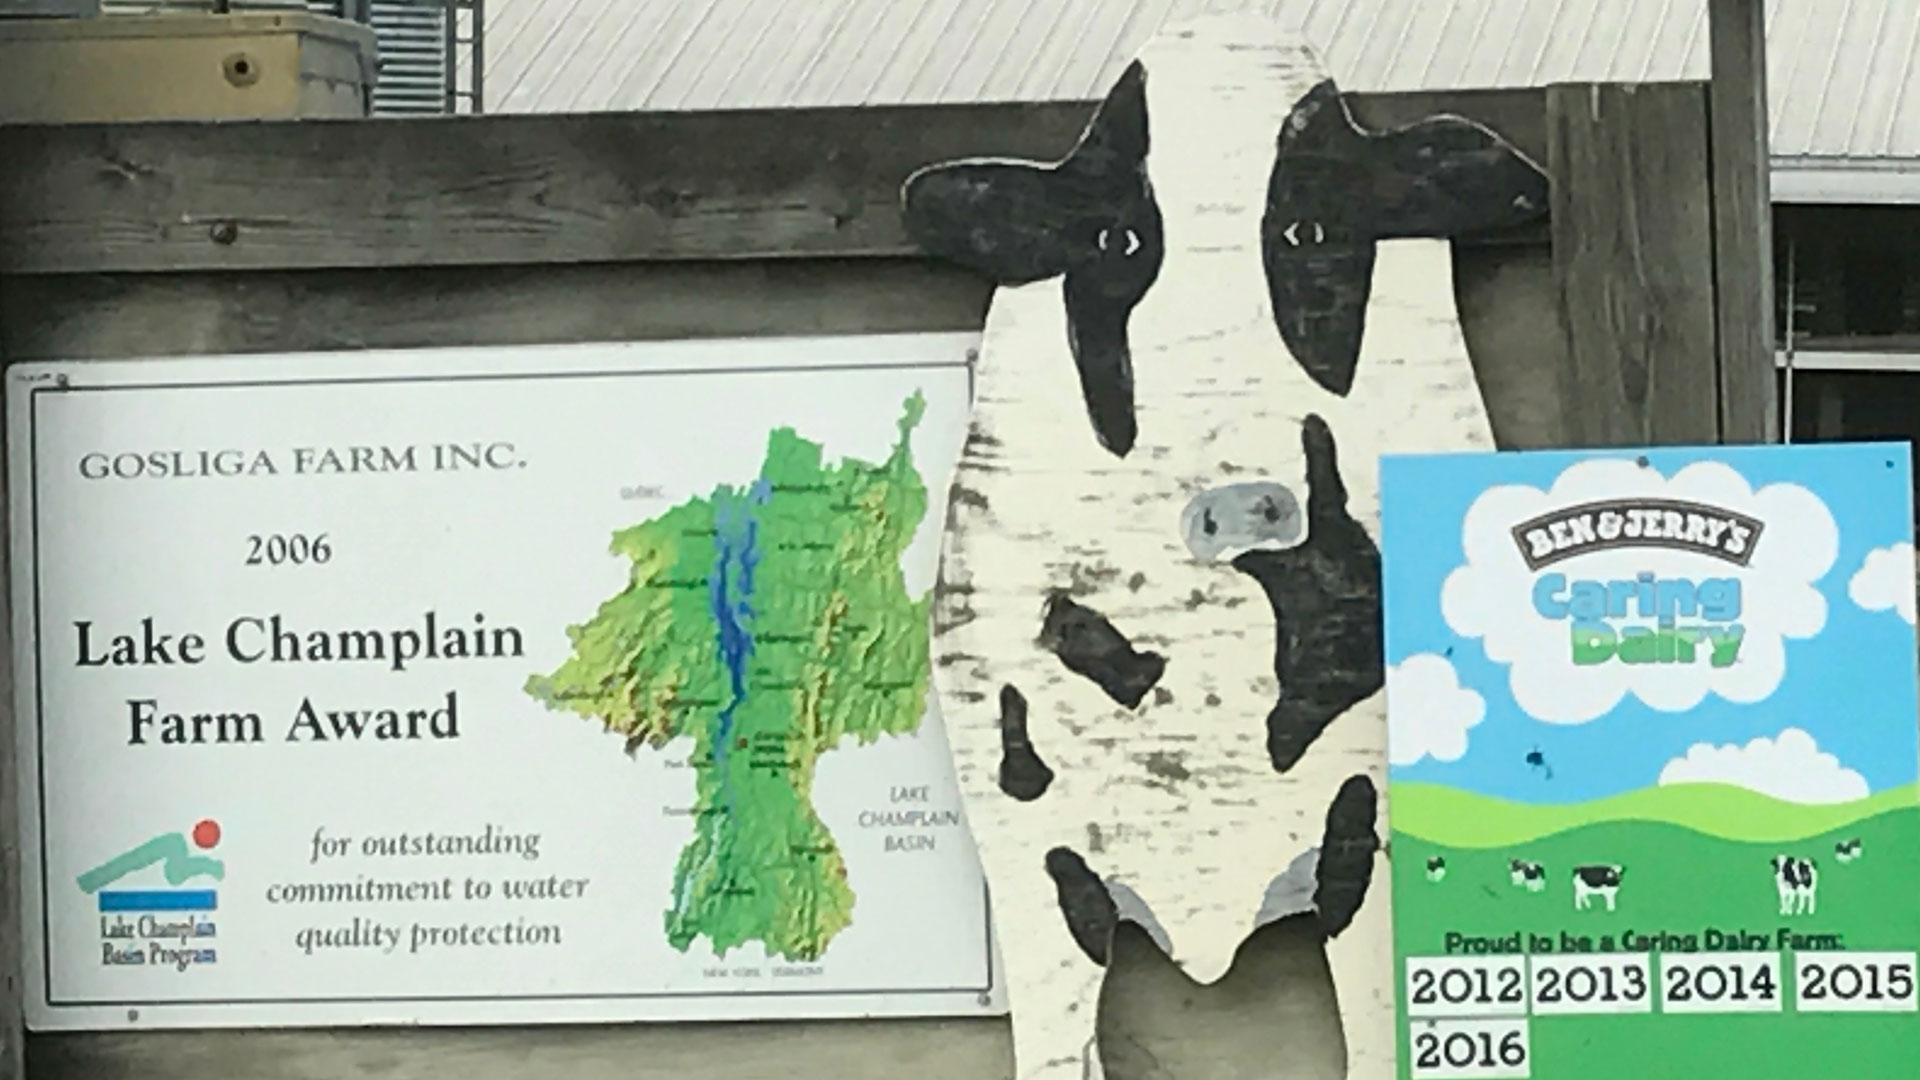 Ben & Jerry’s ‘Caring Dairy’ Farm Caught Cheating to Avoid Regulations and Oversight